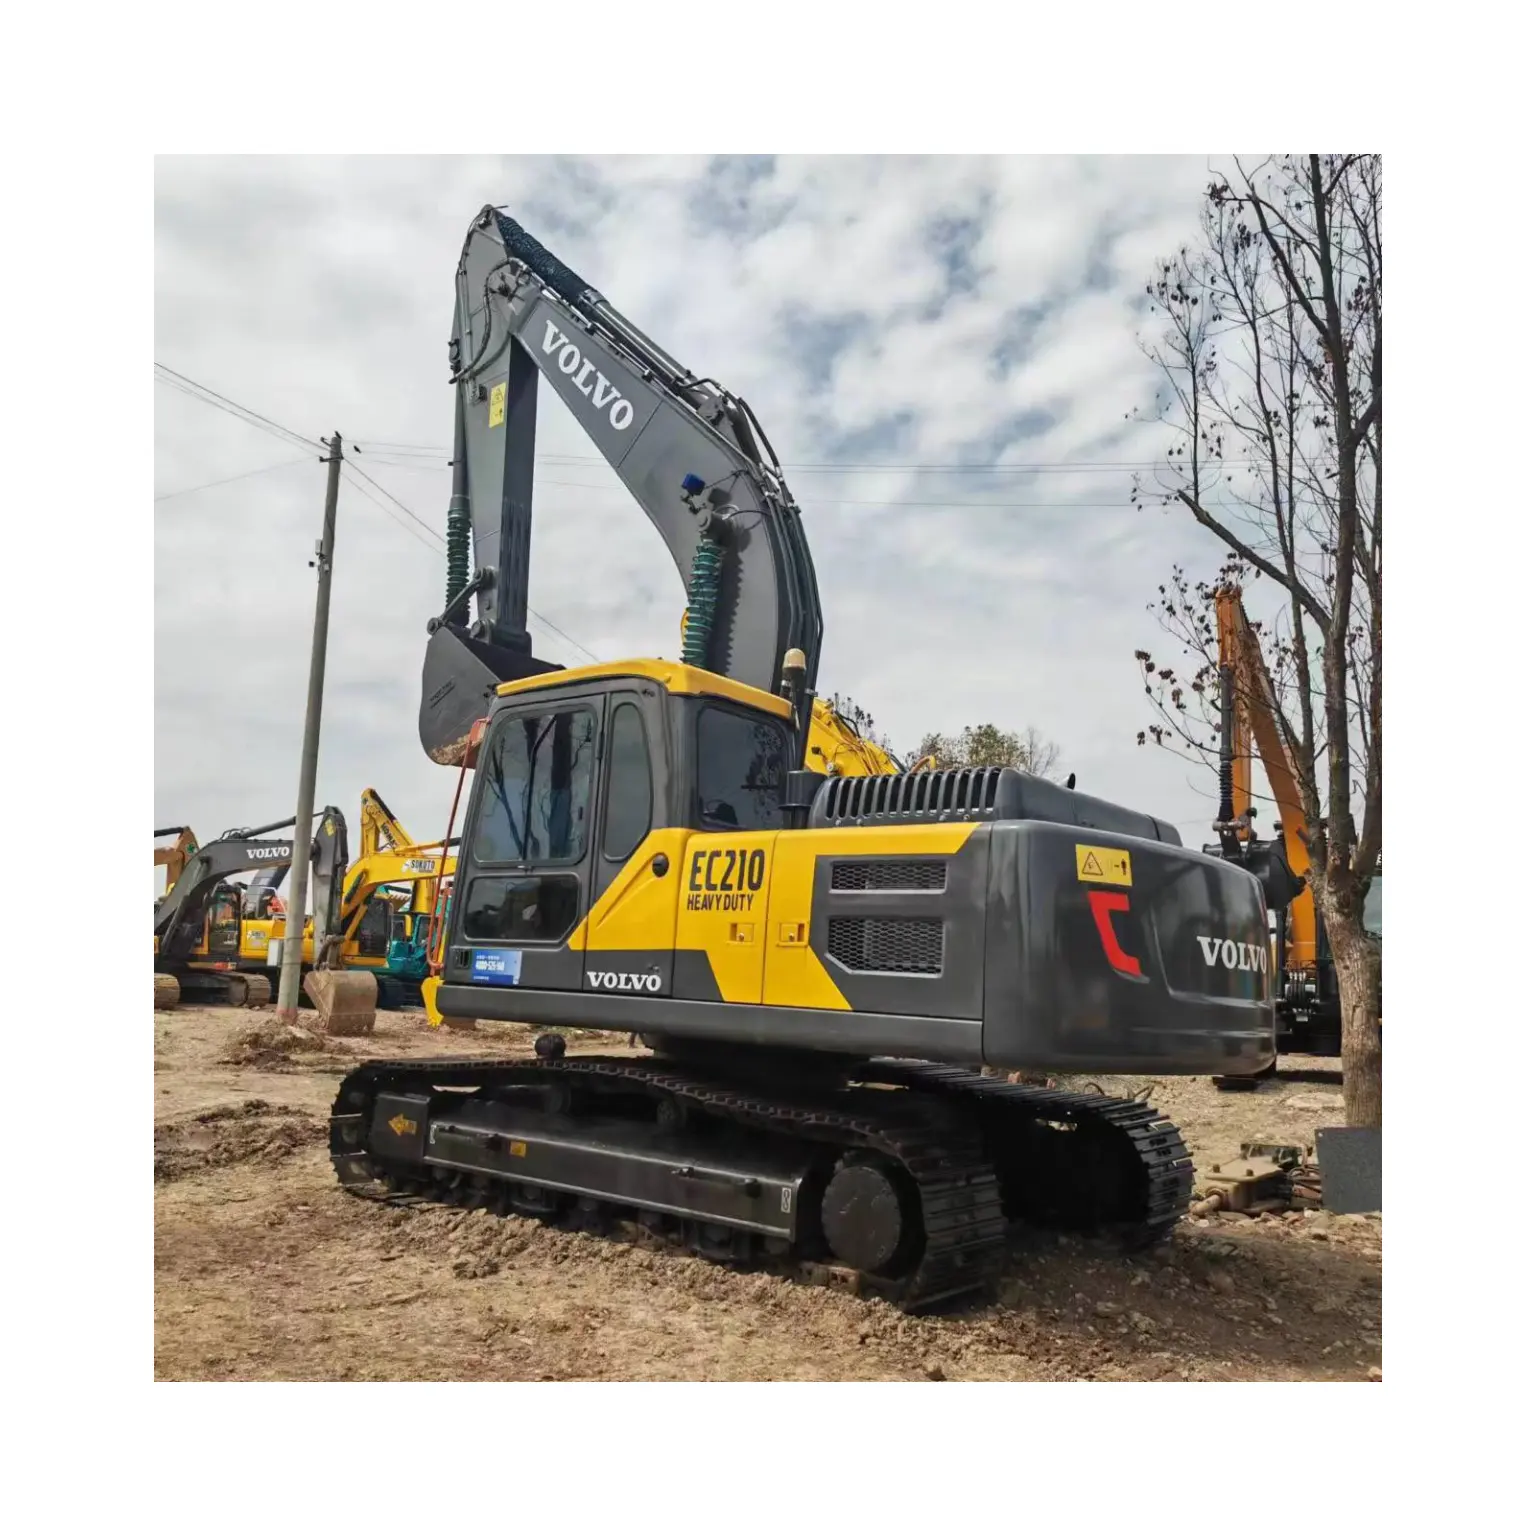 hot selling Volvo Ec210 excavator used 21ton Digger construction machinery ec210 used volvo in stock